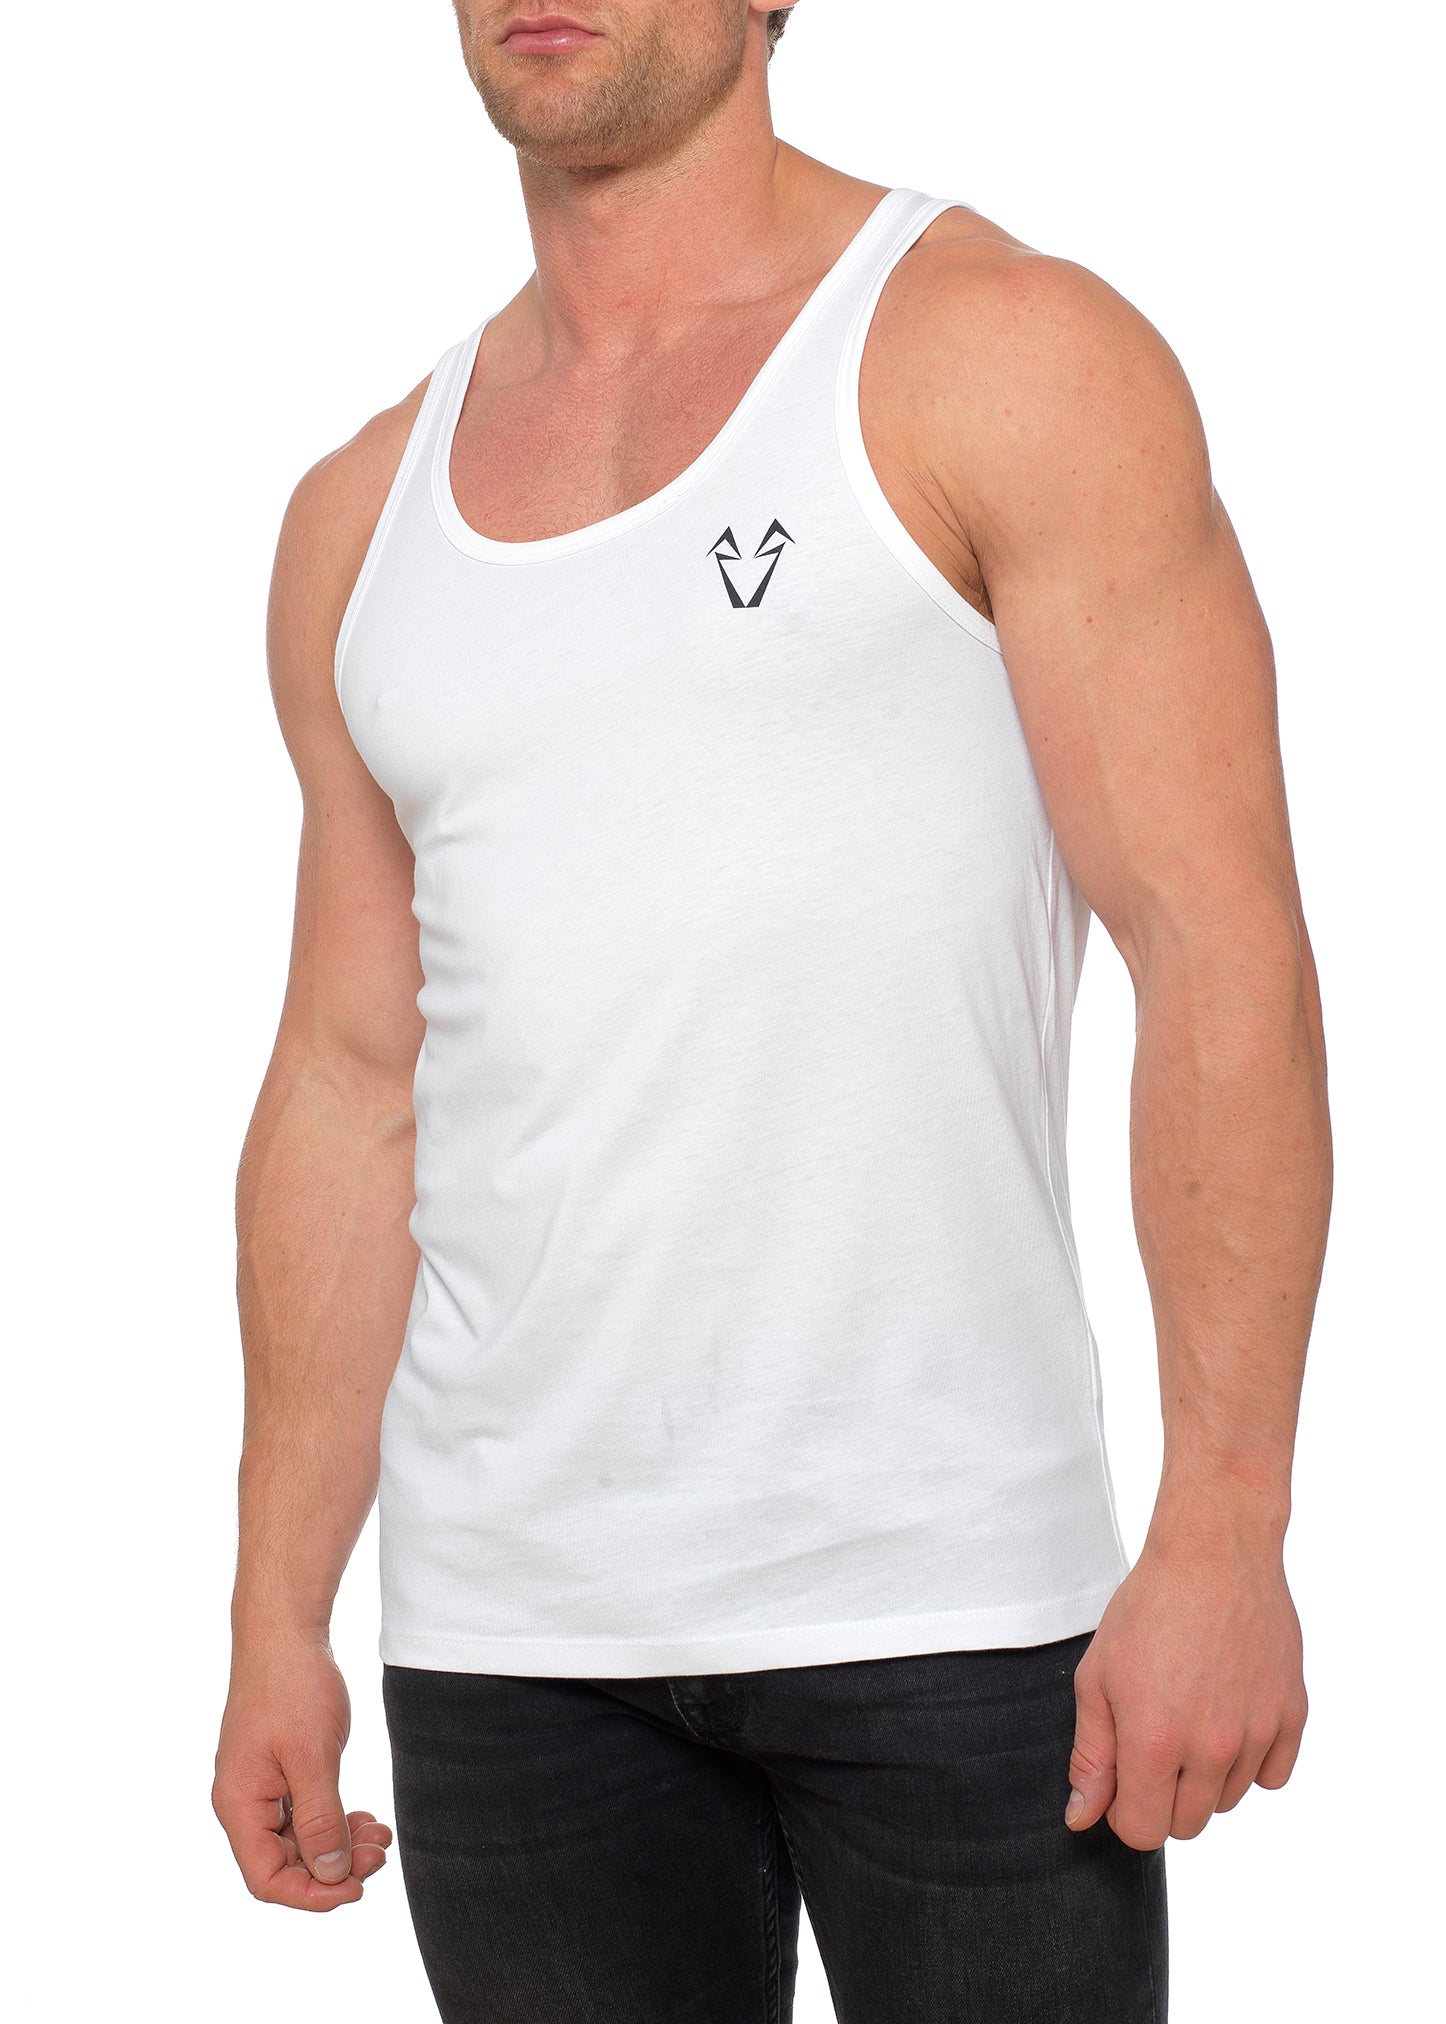 Mens Muscle Fit White Vests